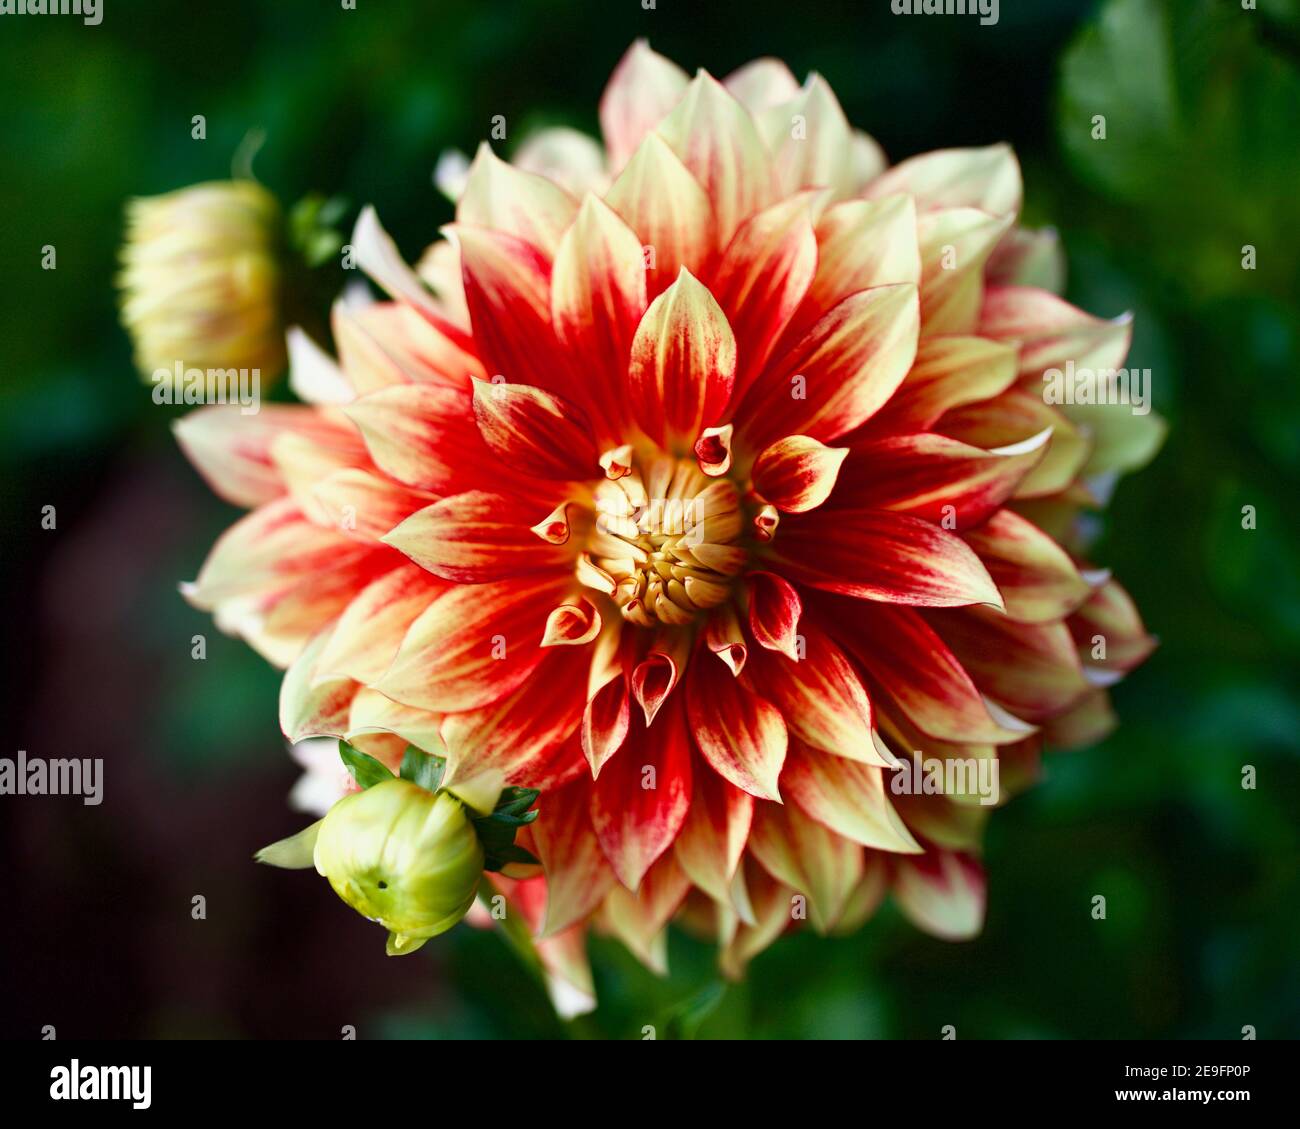 Flamethrower dahlia captured at Swan Island Dahlias in Canby, Oregon, USA Stock Photo